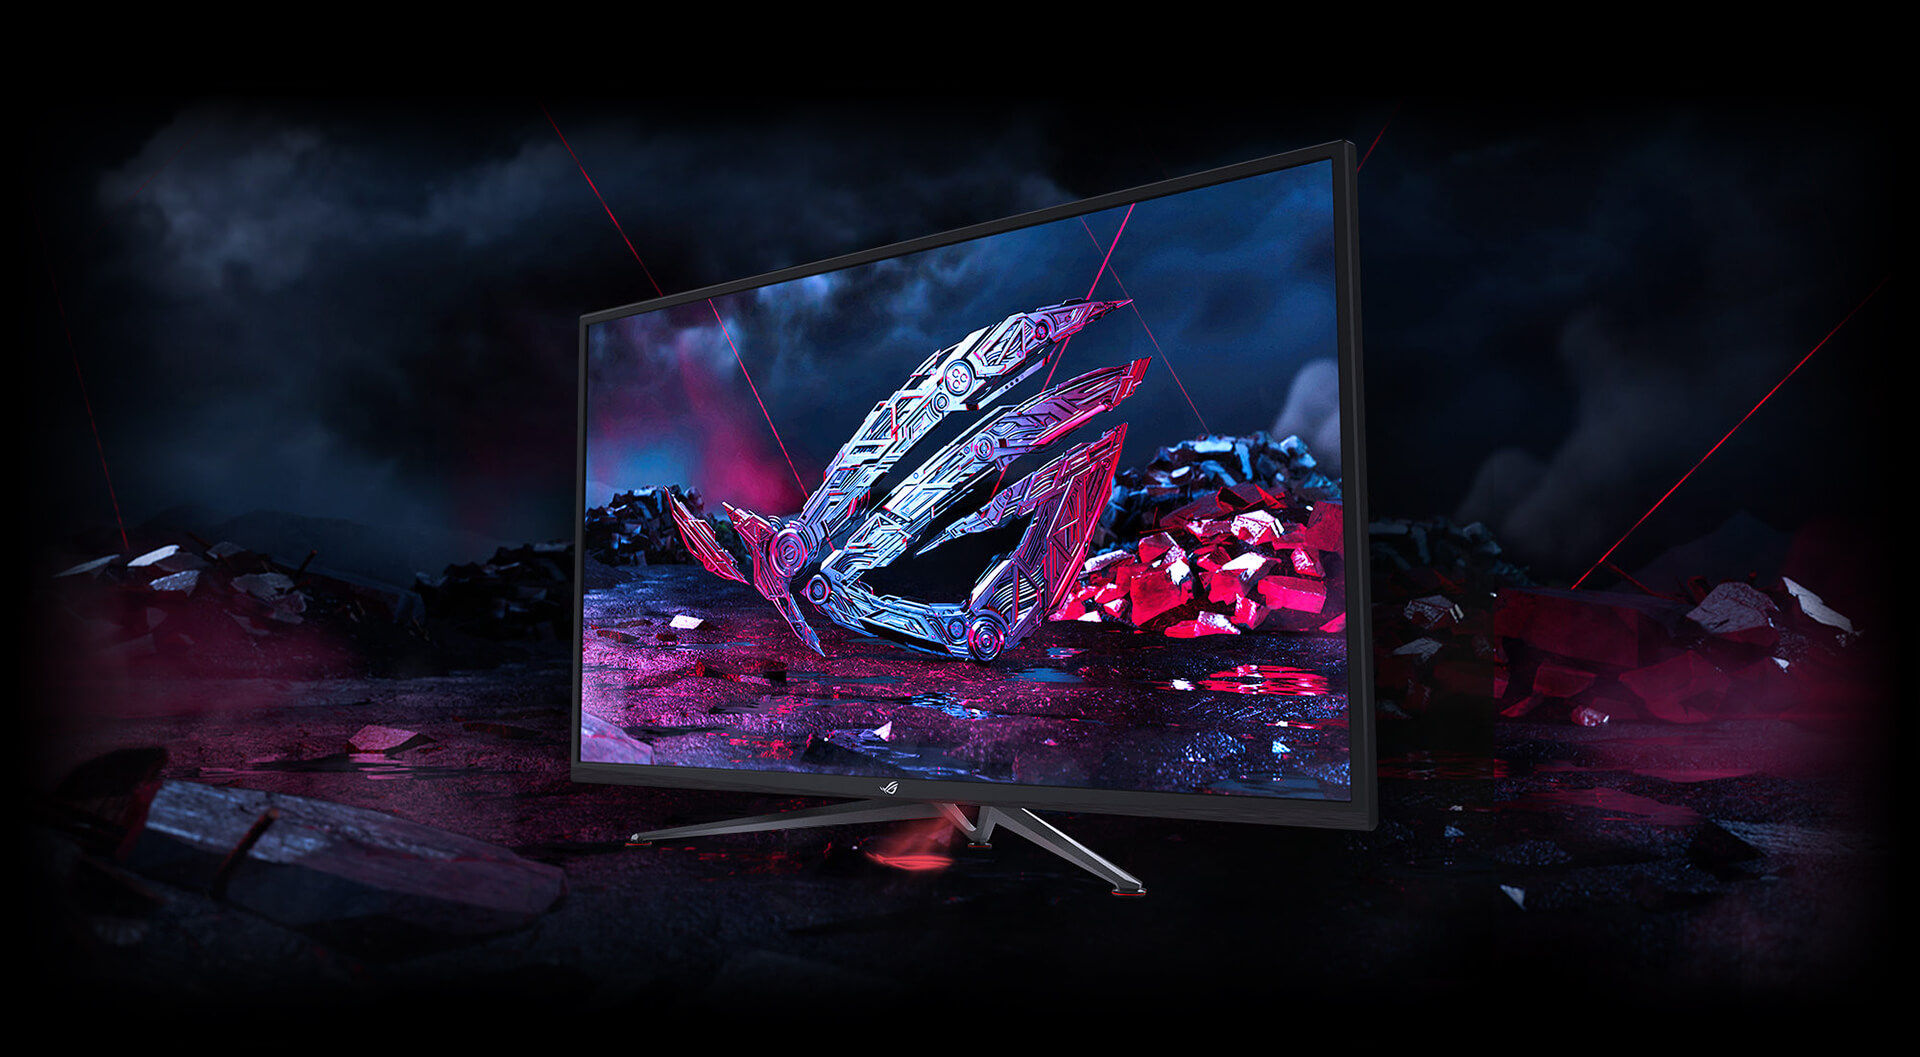 Media asset in full size related to 3dfxzone.it news item entitled as follows: ASUS lancia il gaming monitor ROG Strix XG438Q - 4K UHD & FreeSync 2 HDR Ready | Image Name: news29852_ASUS-ROG-Strix-XG438Q_1.jpg